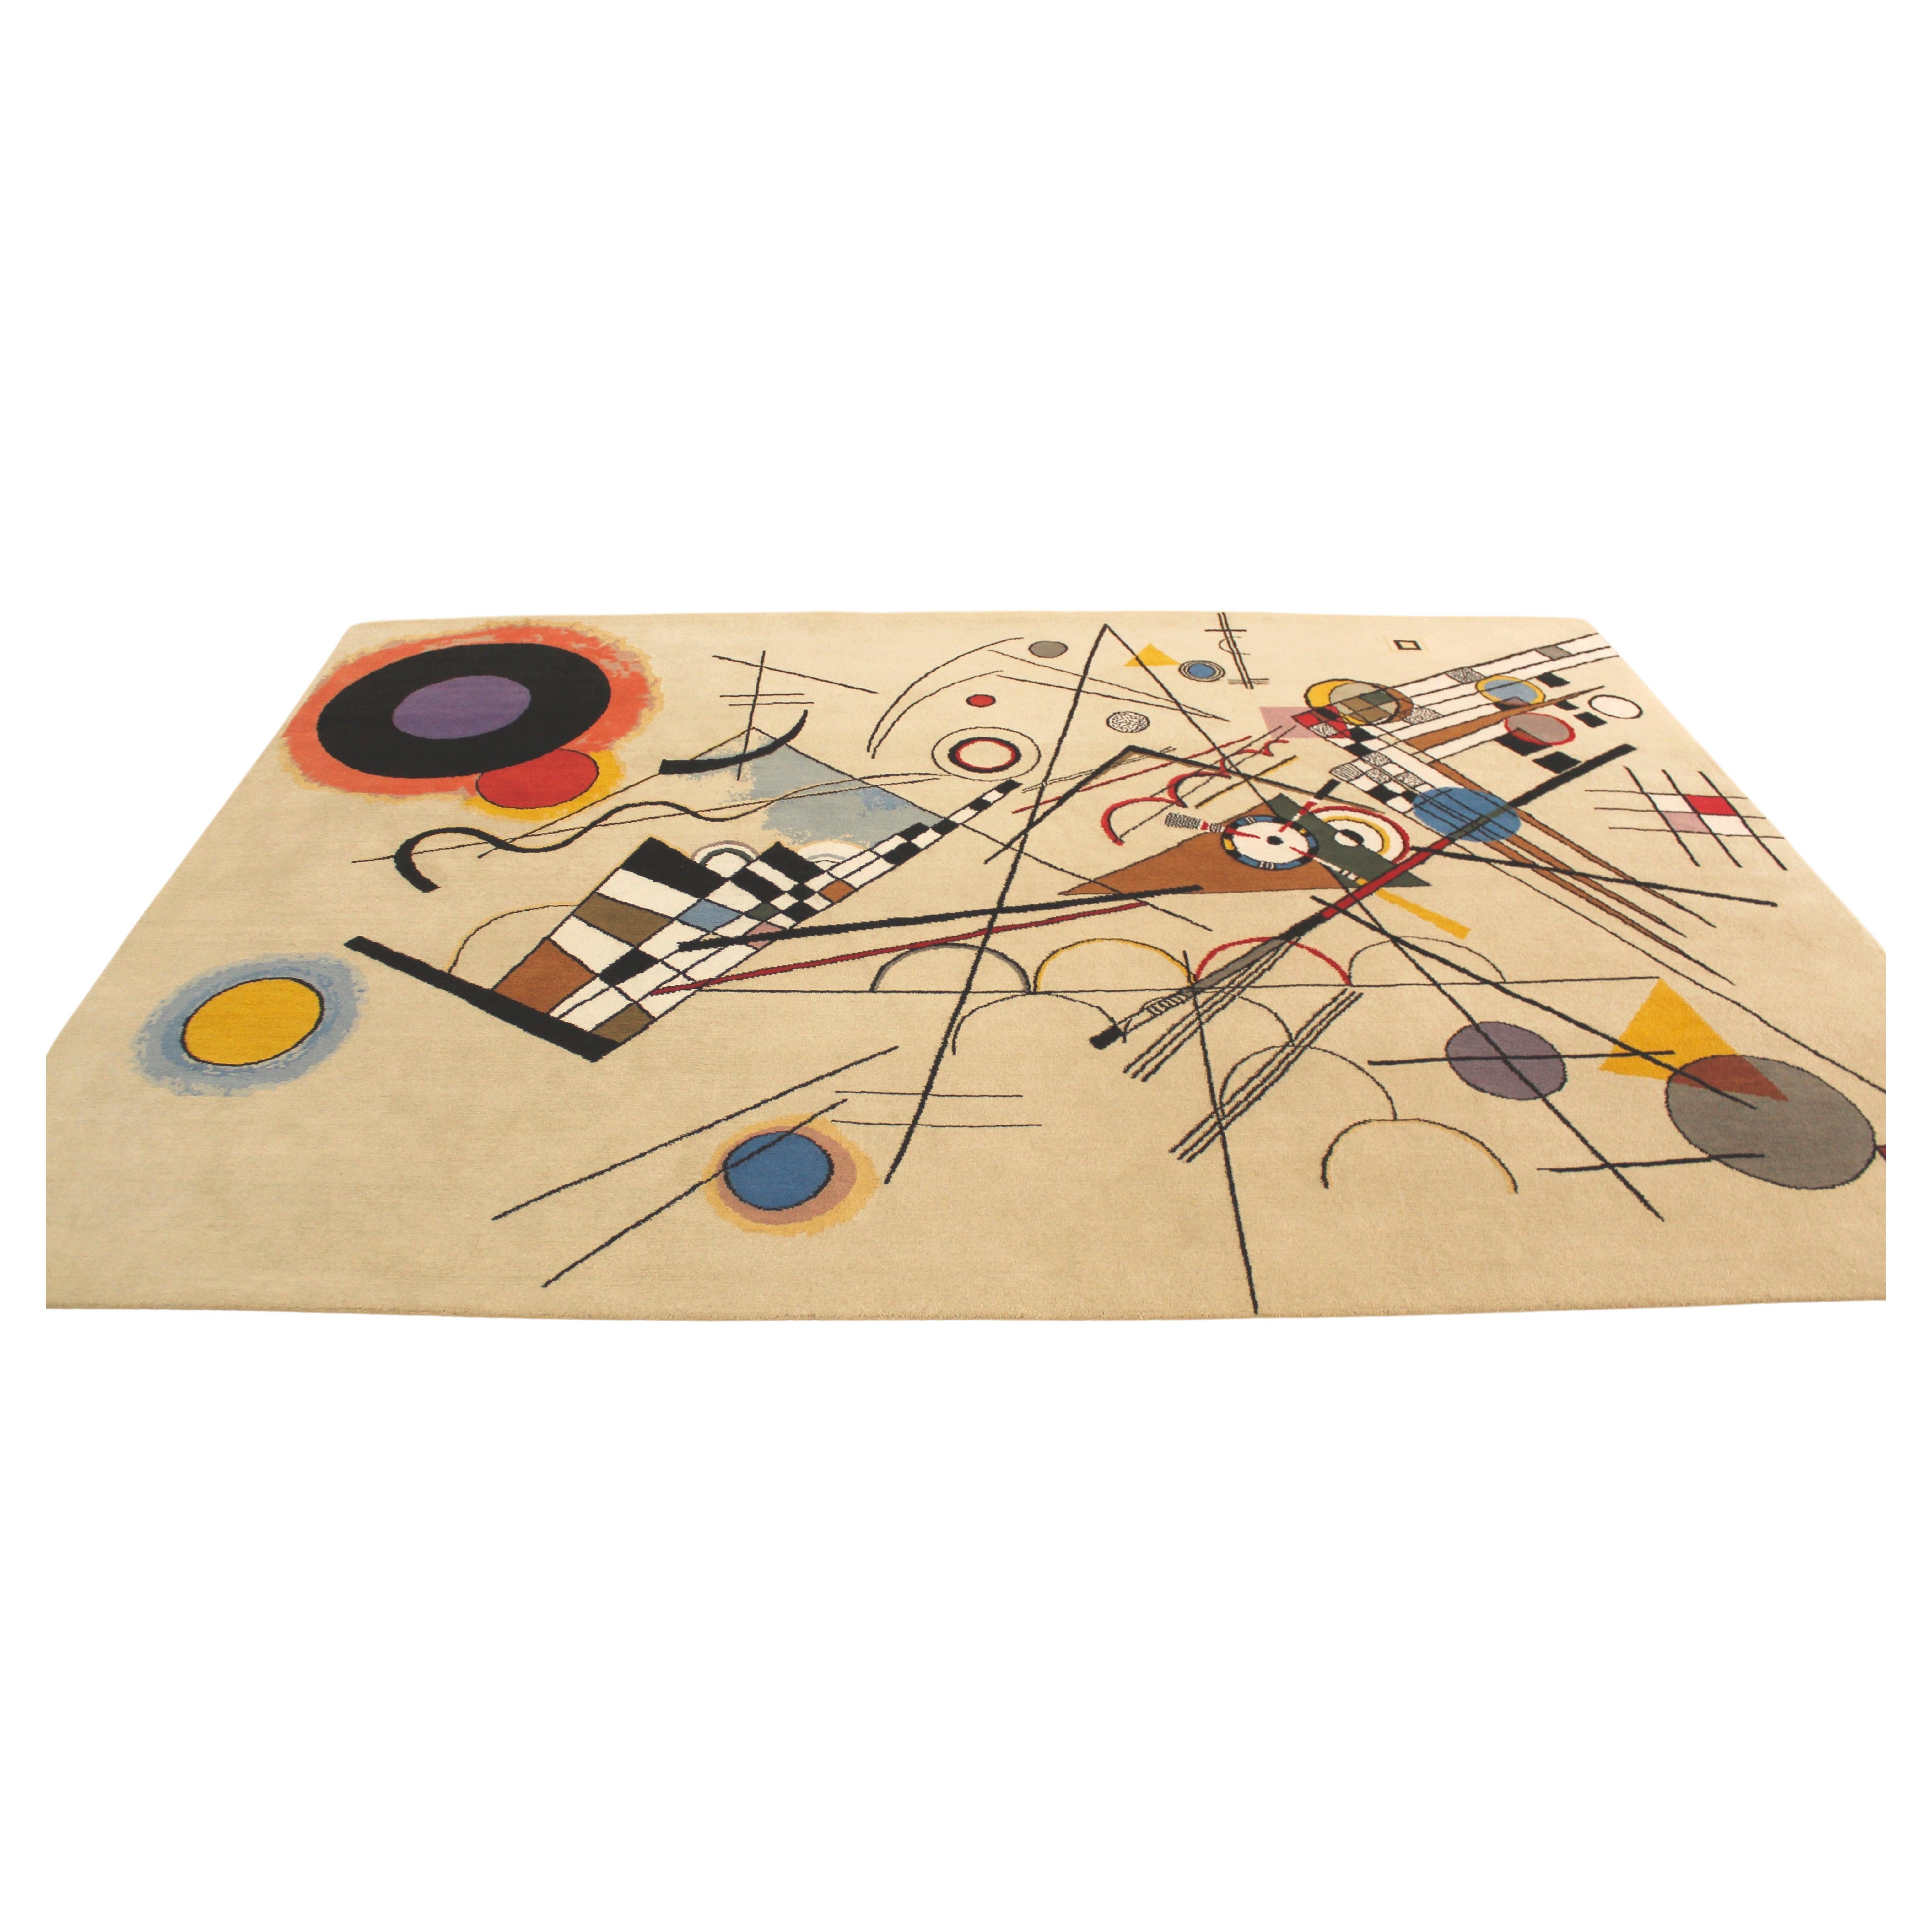 Custom Hand knotted Rug, after Wassily Kandinsky “Composition VIII”. Wool, silk For Sale 3